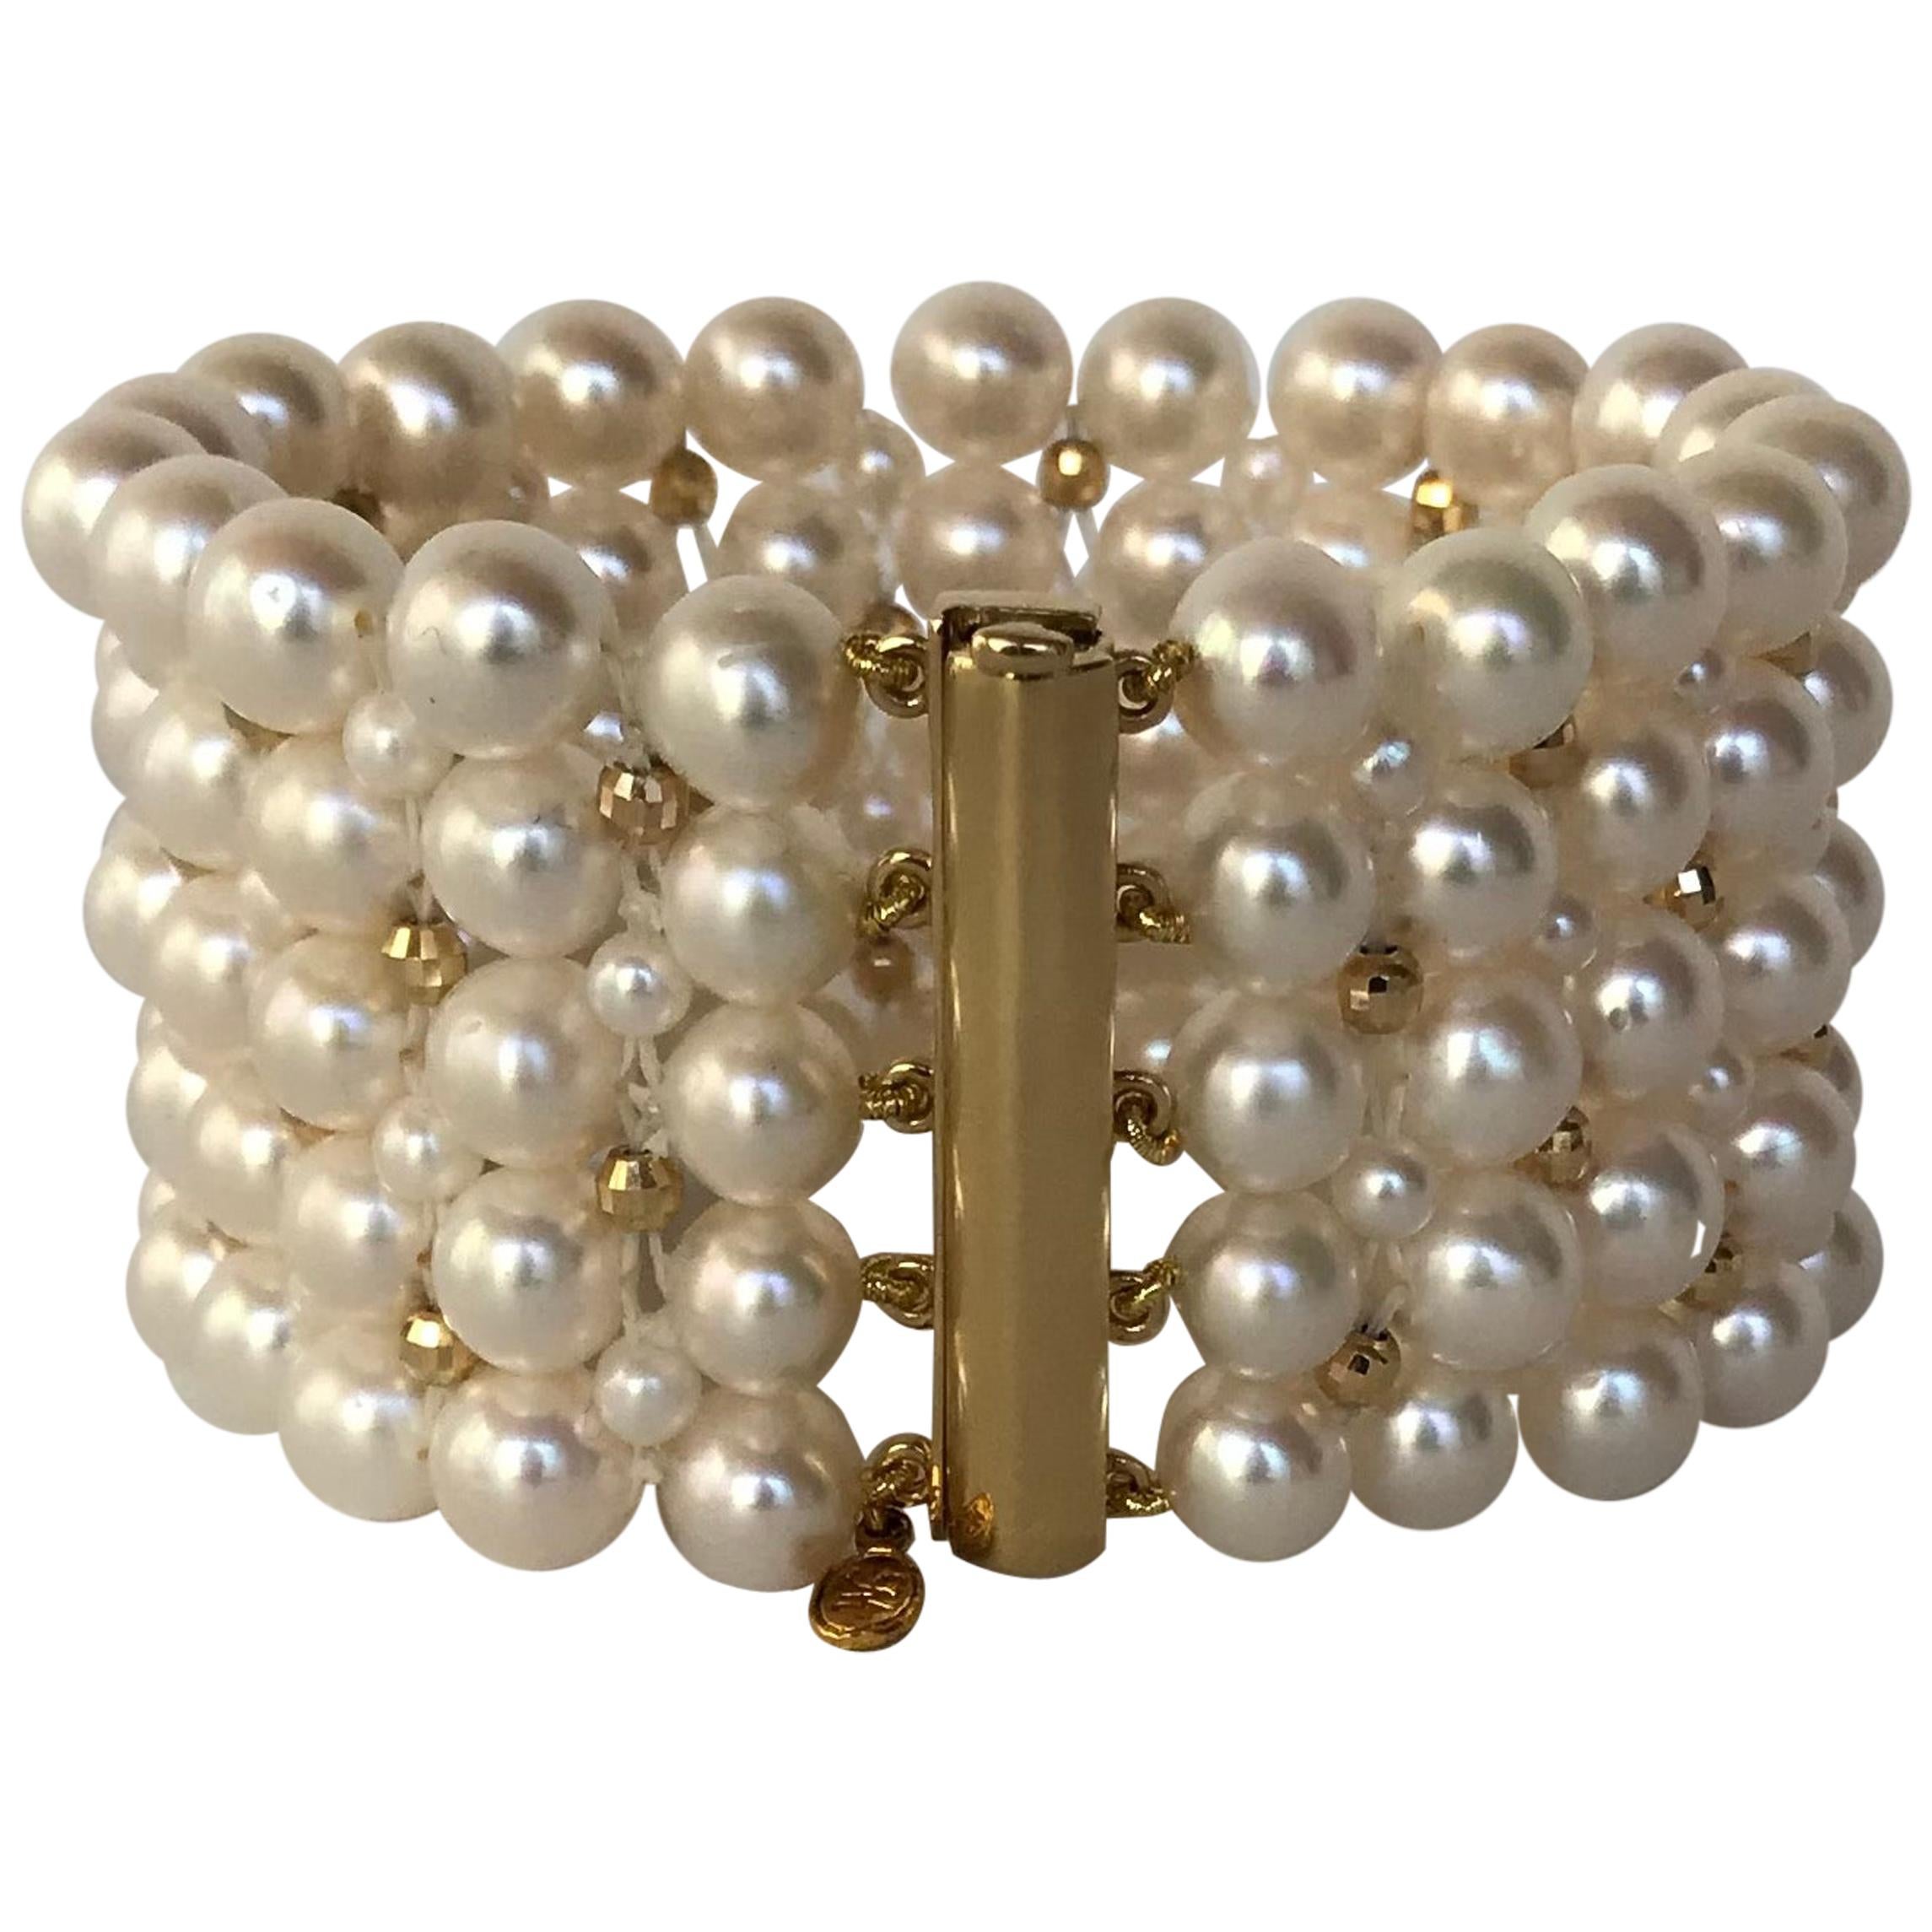 Marina J Stunning Woven Pearl Bracelet with 14 Karat Yellow Gold Beads and Clasp For Sale